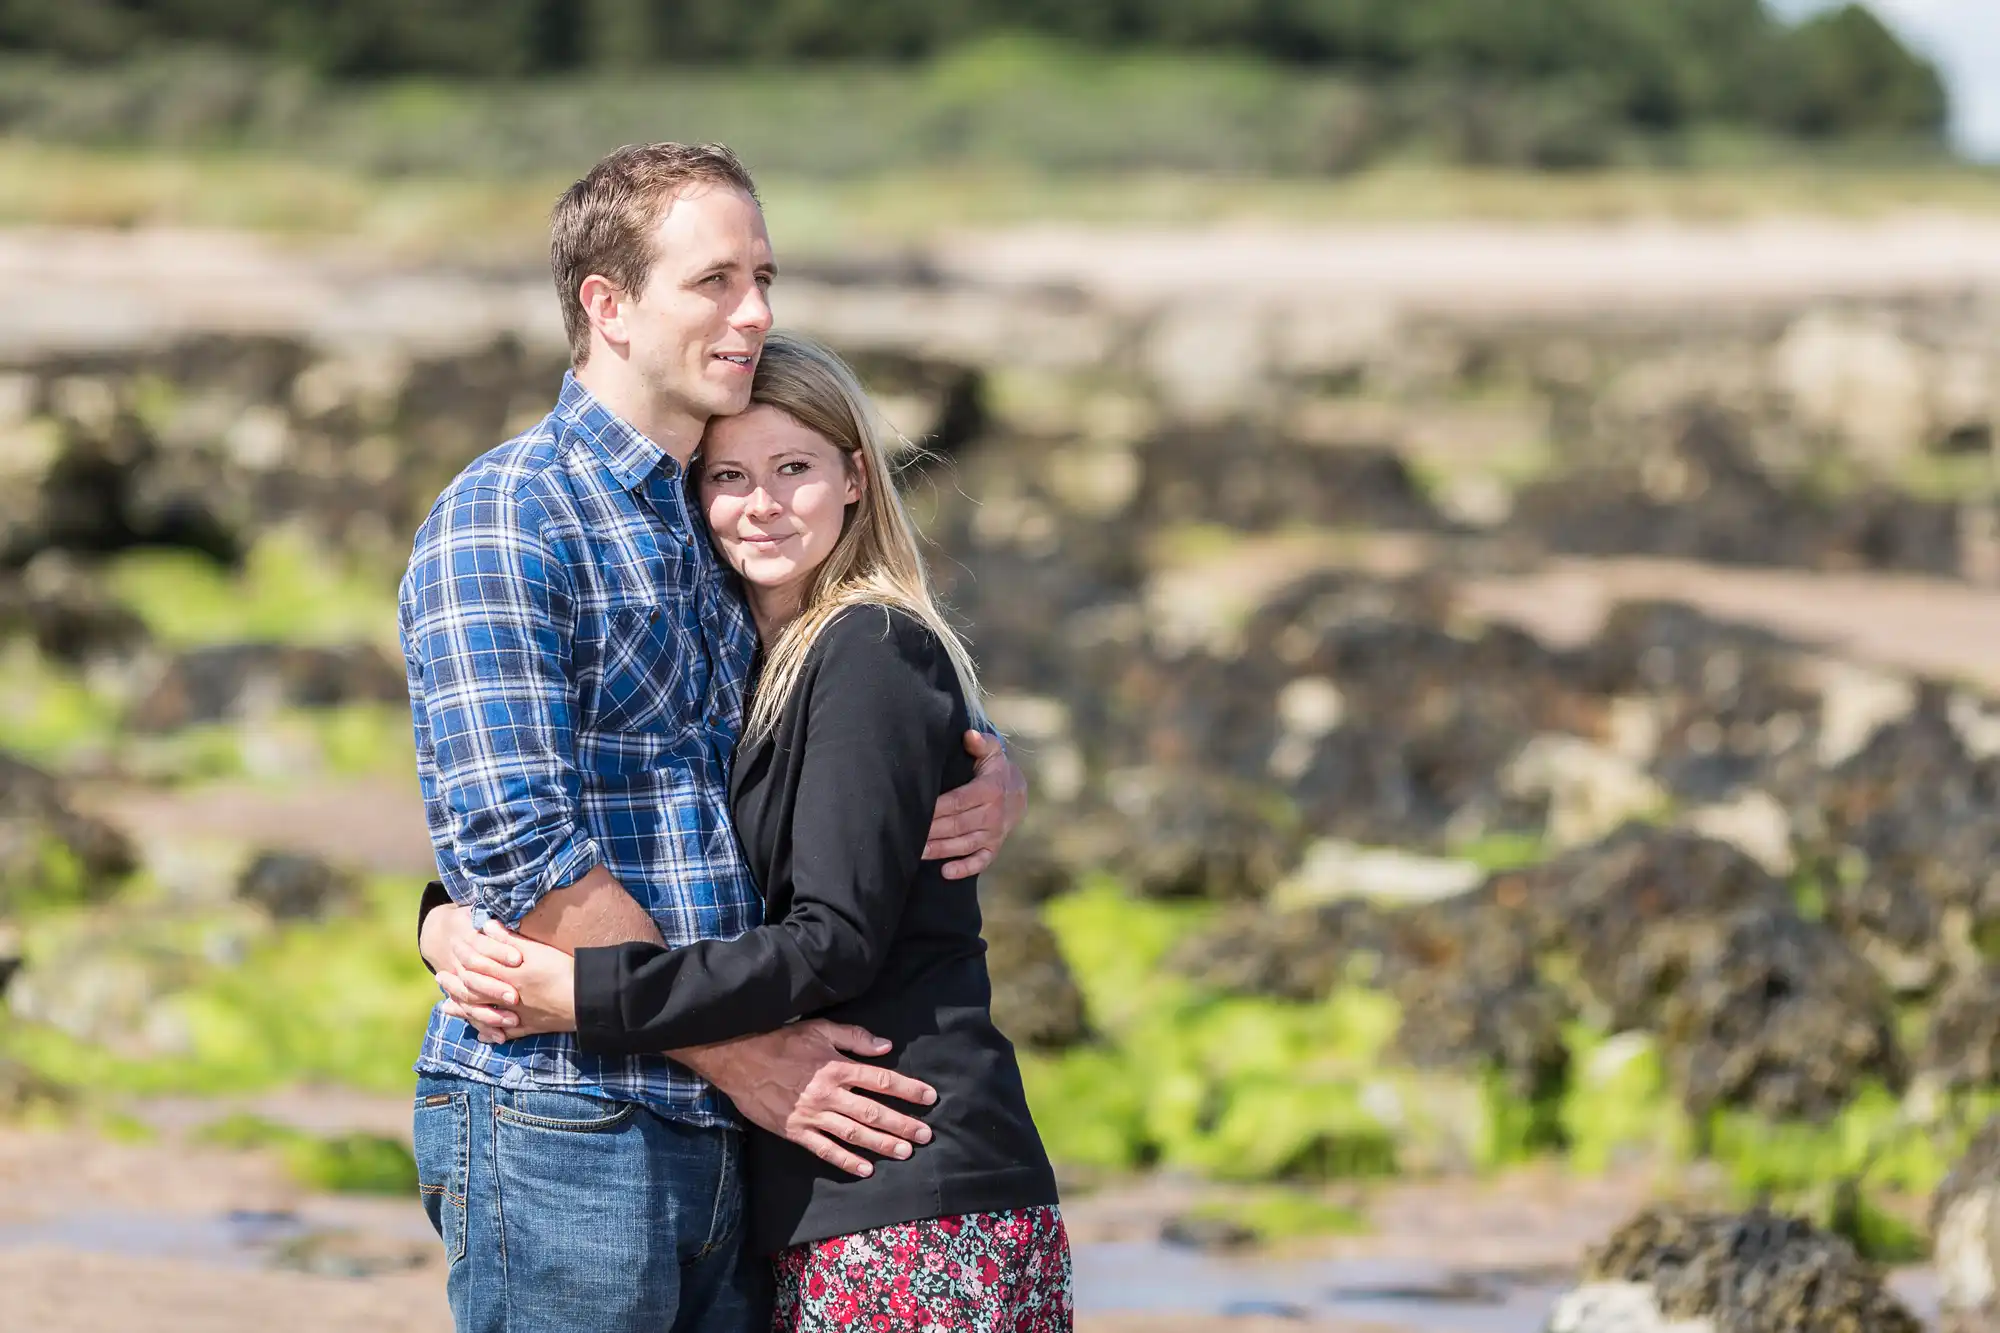 A couple embracing on a rocky beach, smiling gently, with blurred greenery and ocean in the background.